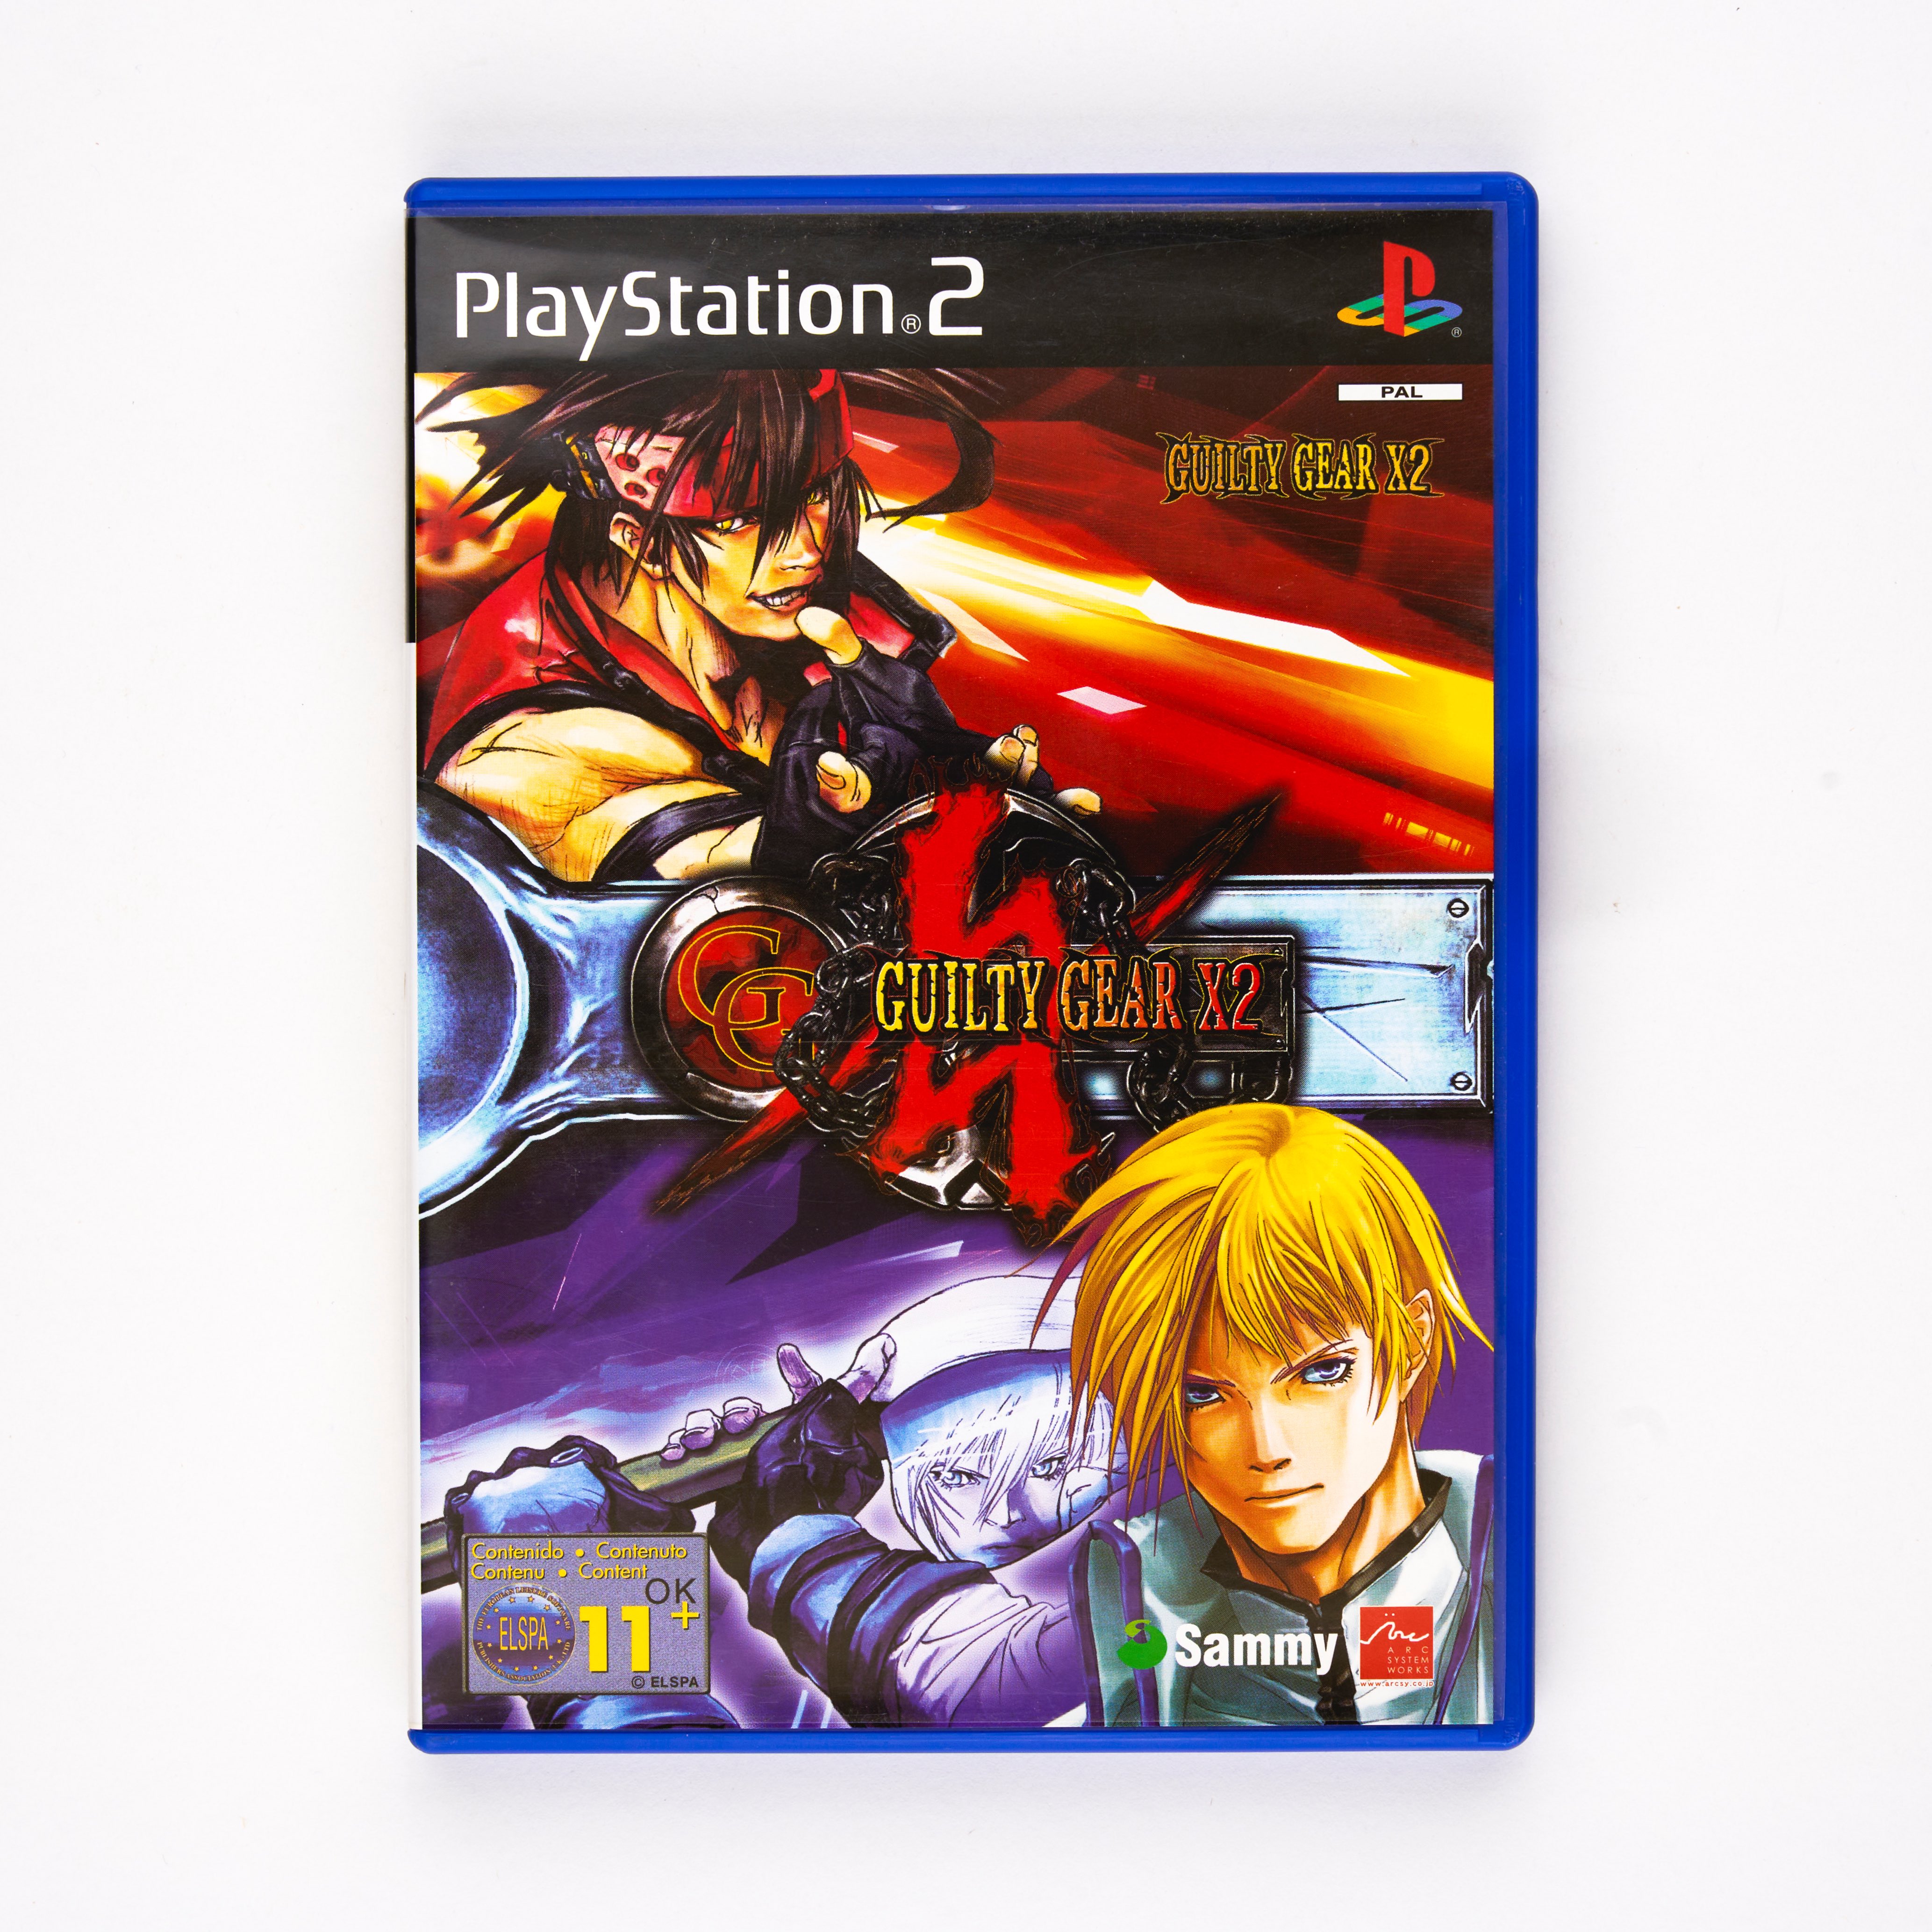 Sony - Guilty Gear X2 PAL - Playstation 2 - Complete In Box